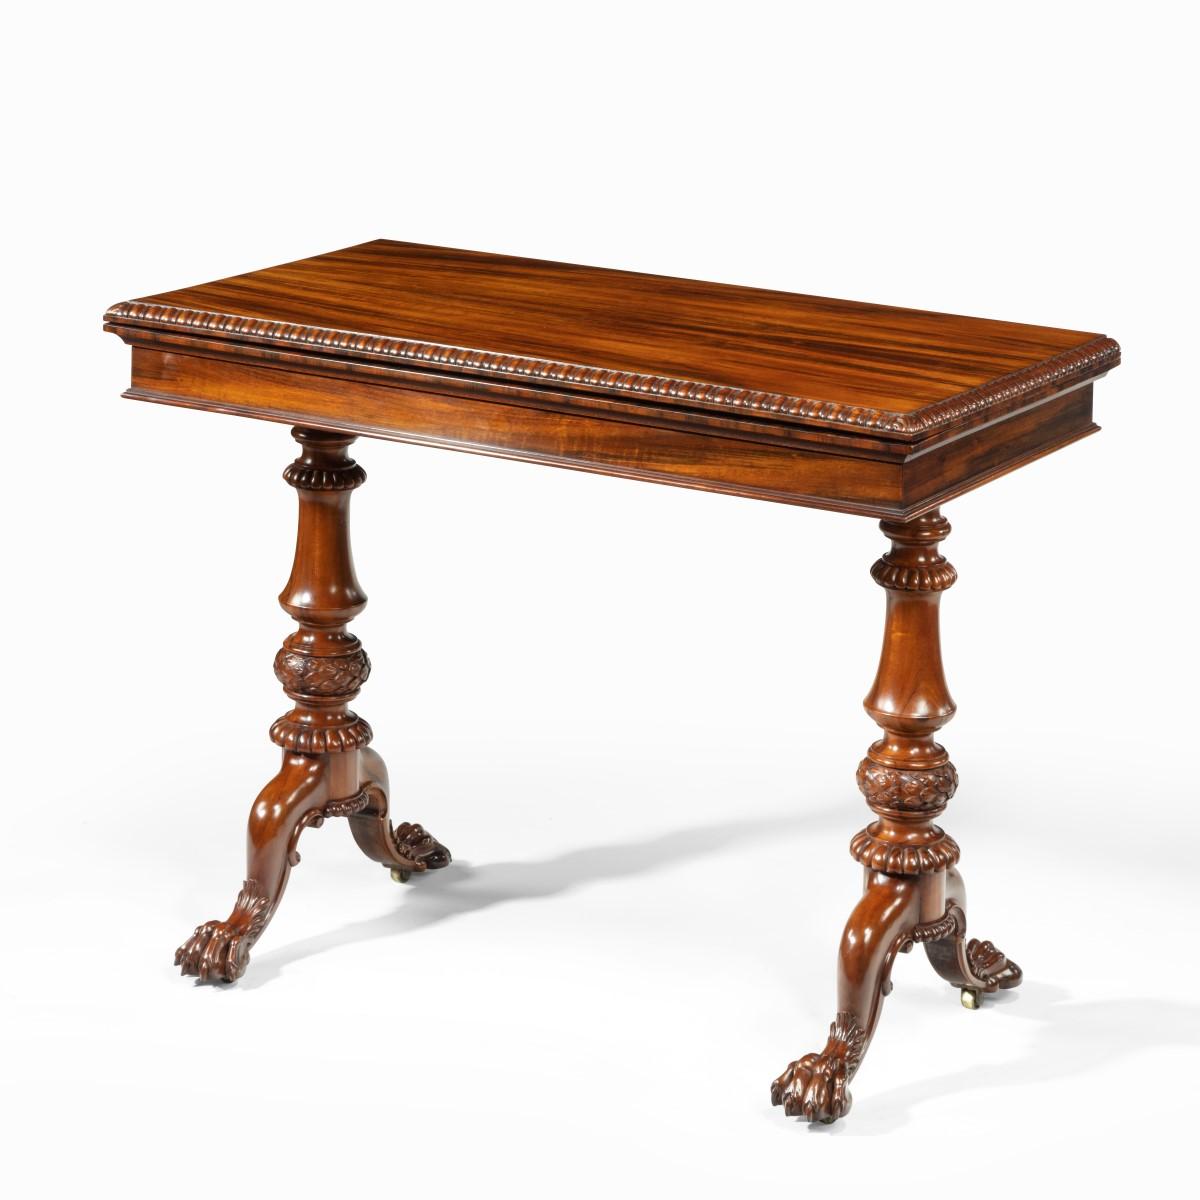 Wood Early Victorian Goncalo Alves Card Table Attributed to Gillows For Sale